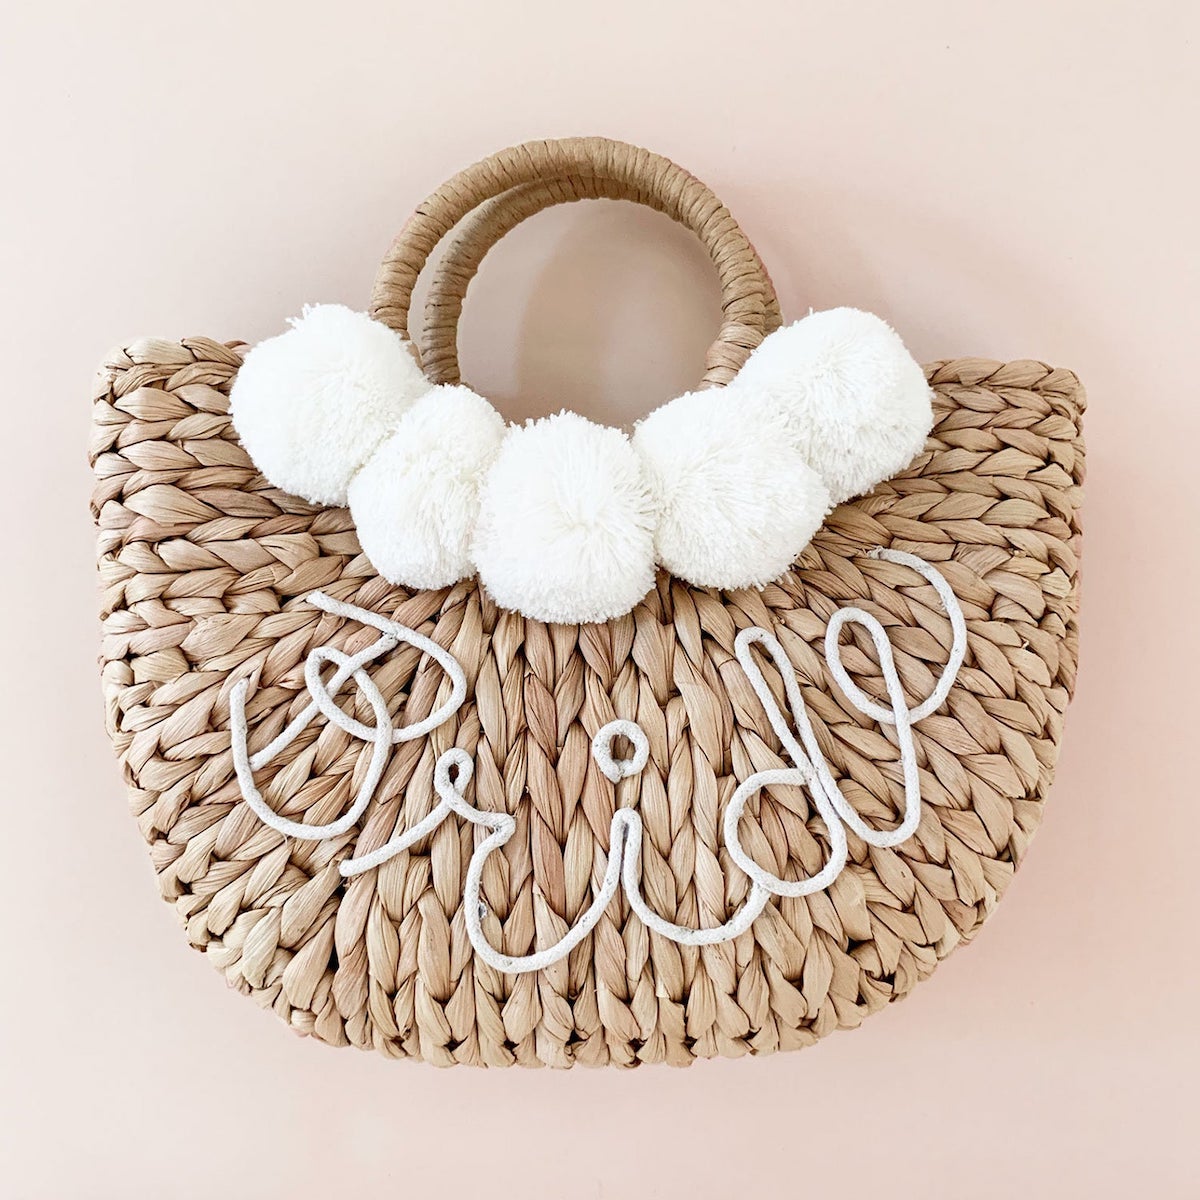 Woven bag that says "Bride" with white pom balls 